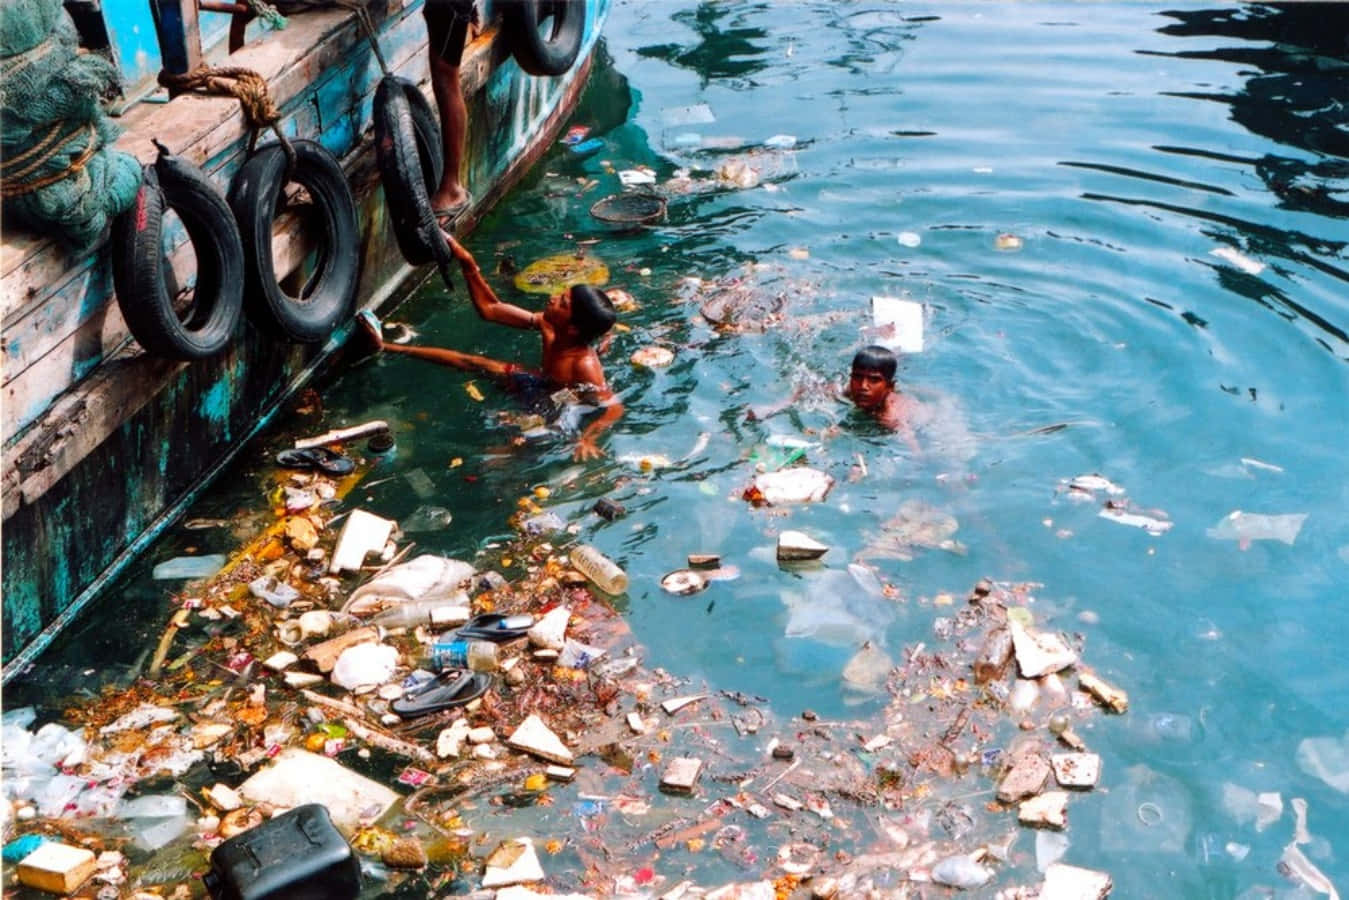 A Group Of People Swimming In The Water With Trash